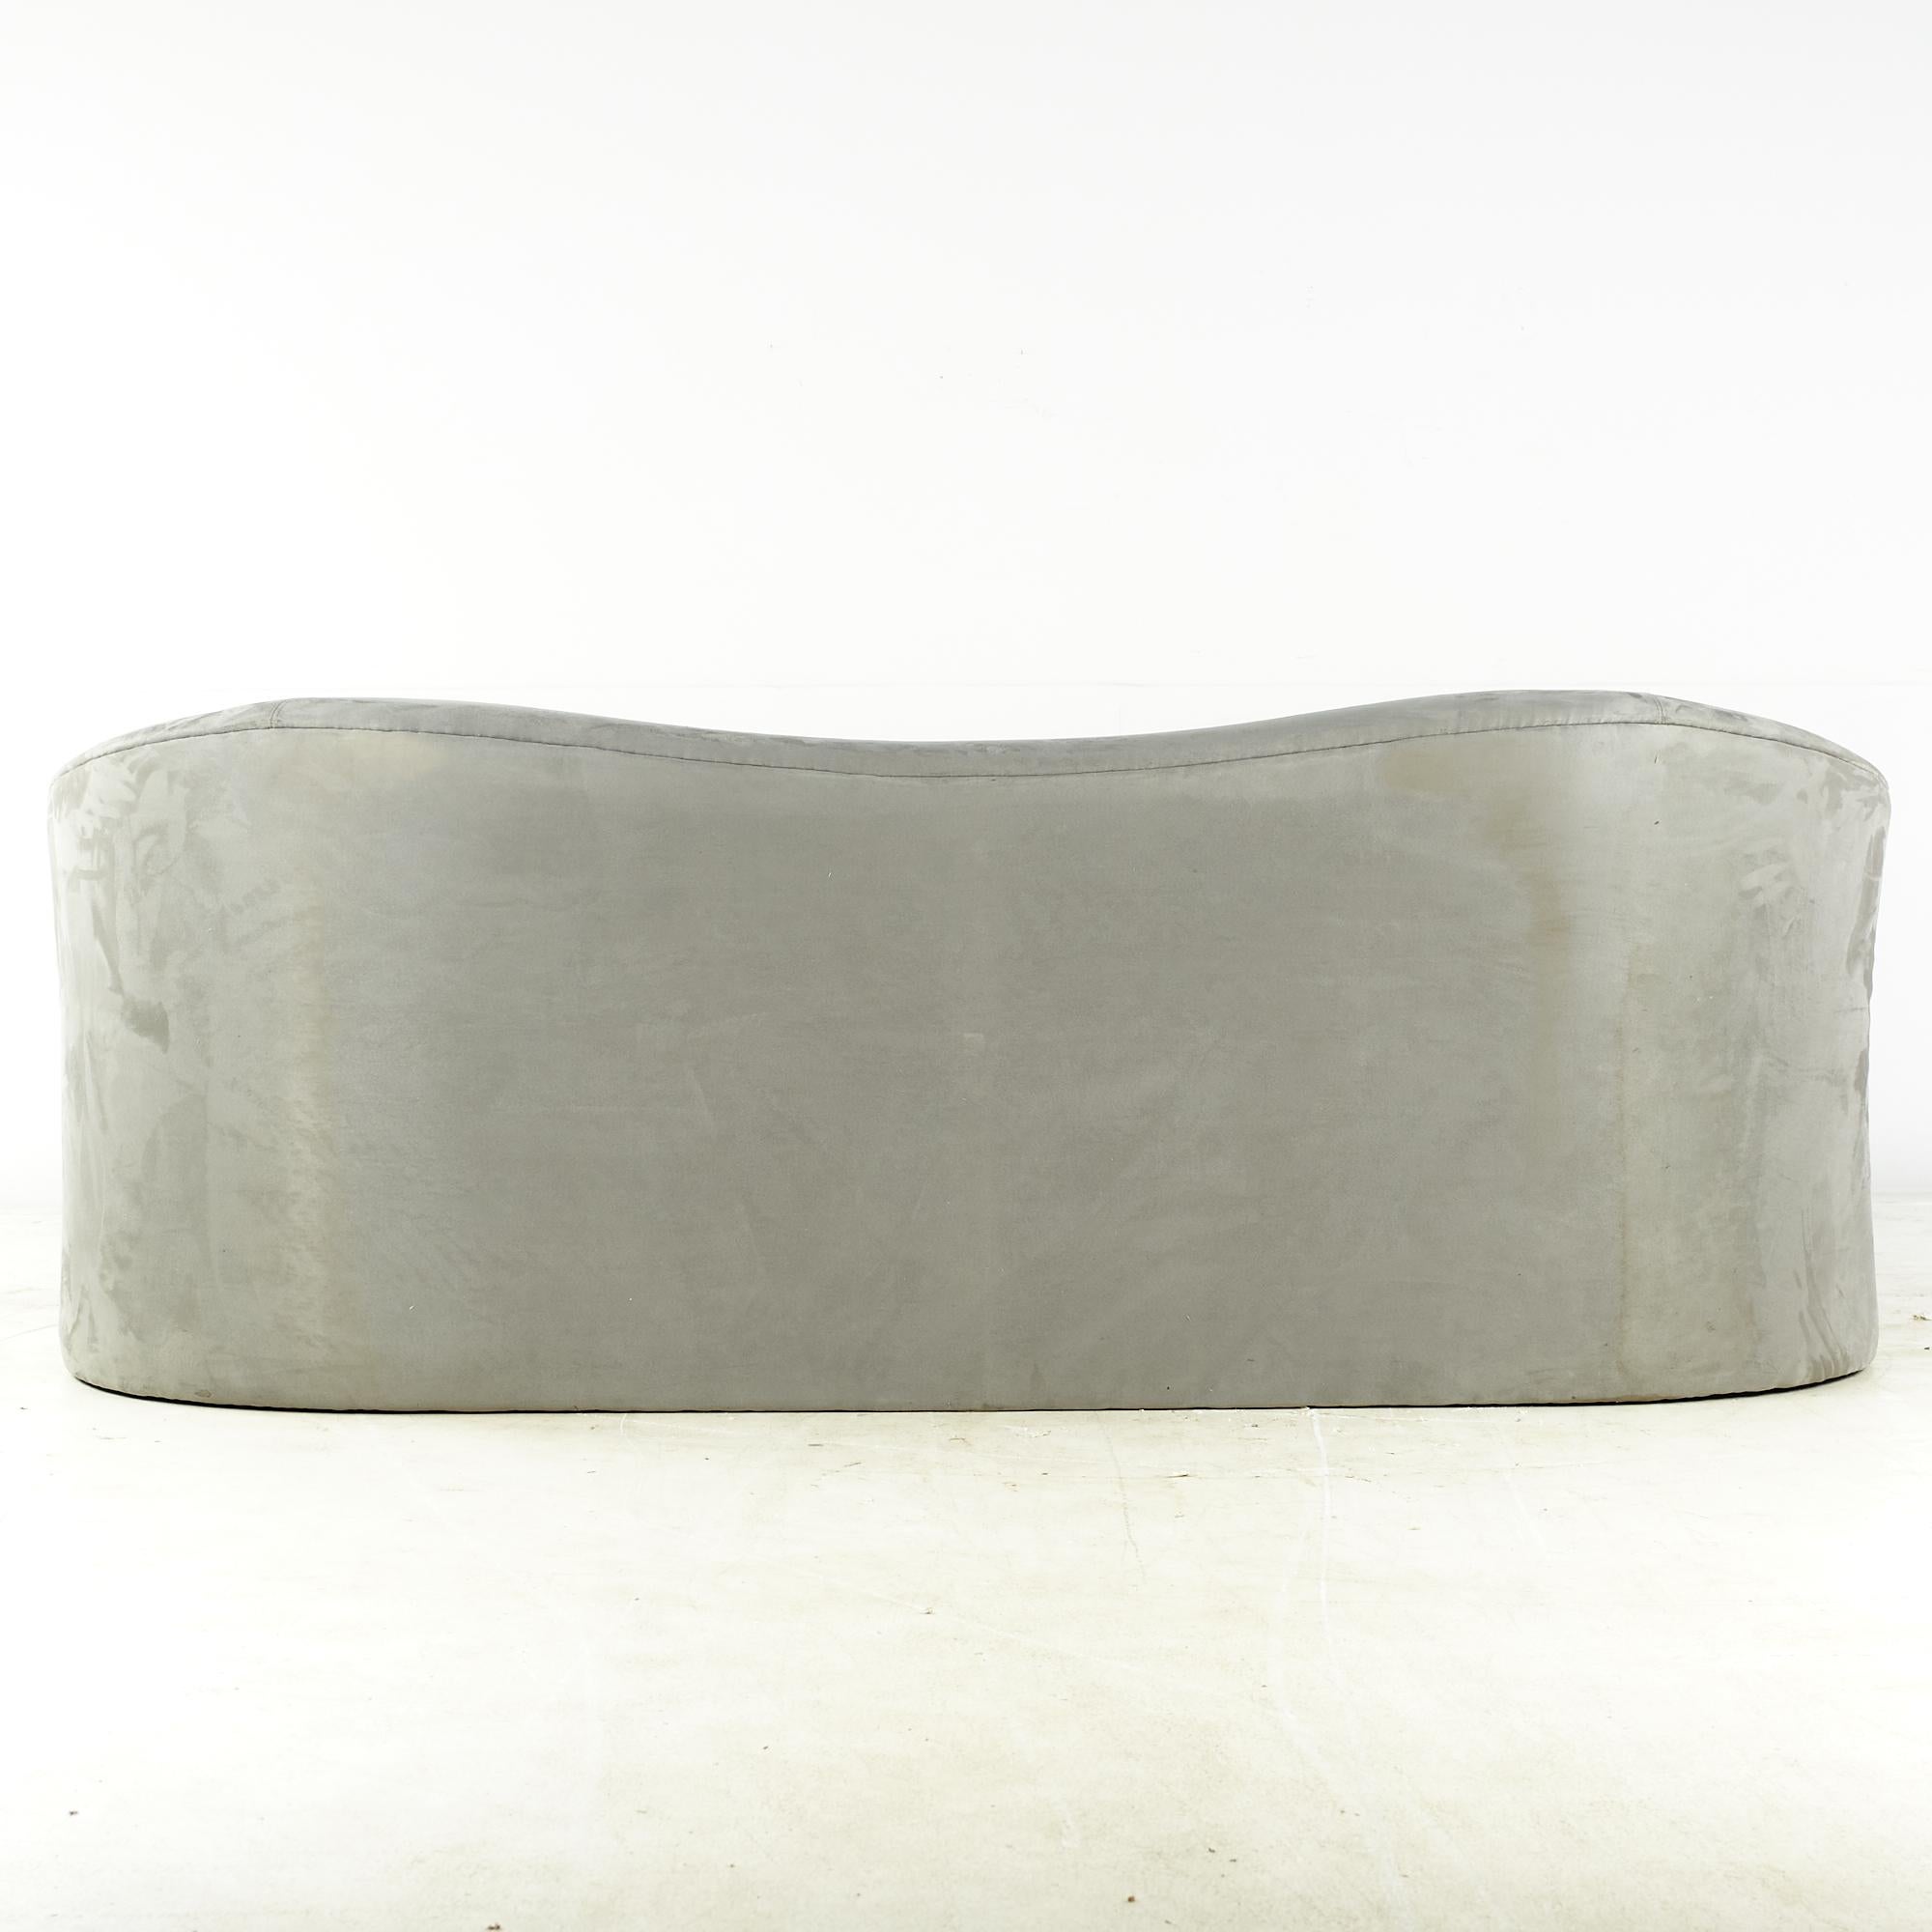 Kagan Style Weiman Midcentury Sculptural Curved Sofa In Good Condition For Sale In Countryside, IL